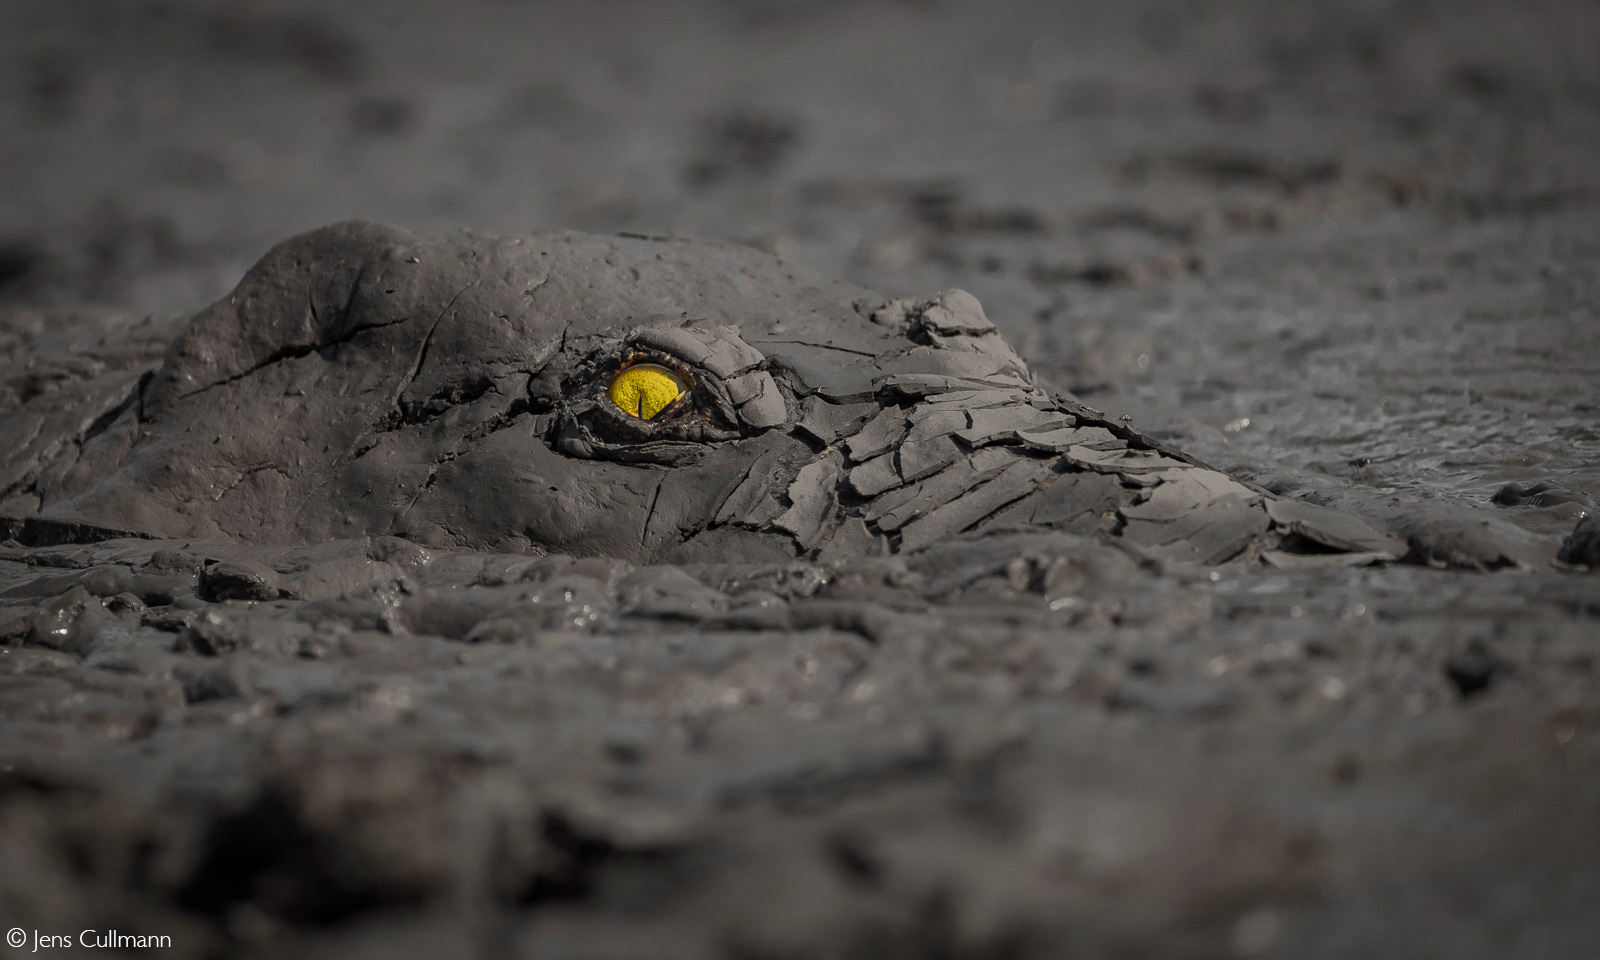 A crocodile opens its eyes while resting in a muddy pool. Mana Pools National Park, Zimbabwe © Jens Cullmann